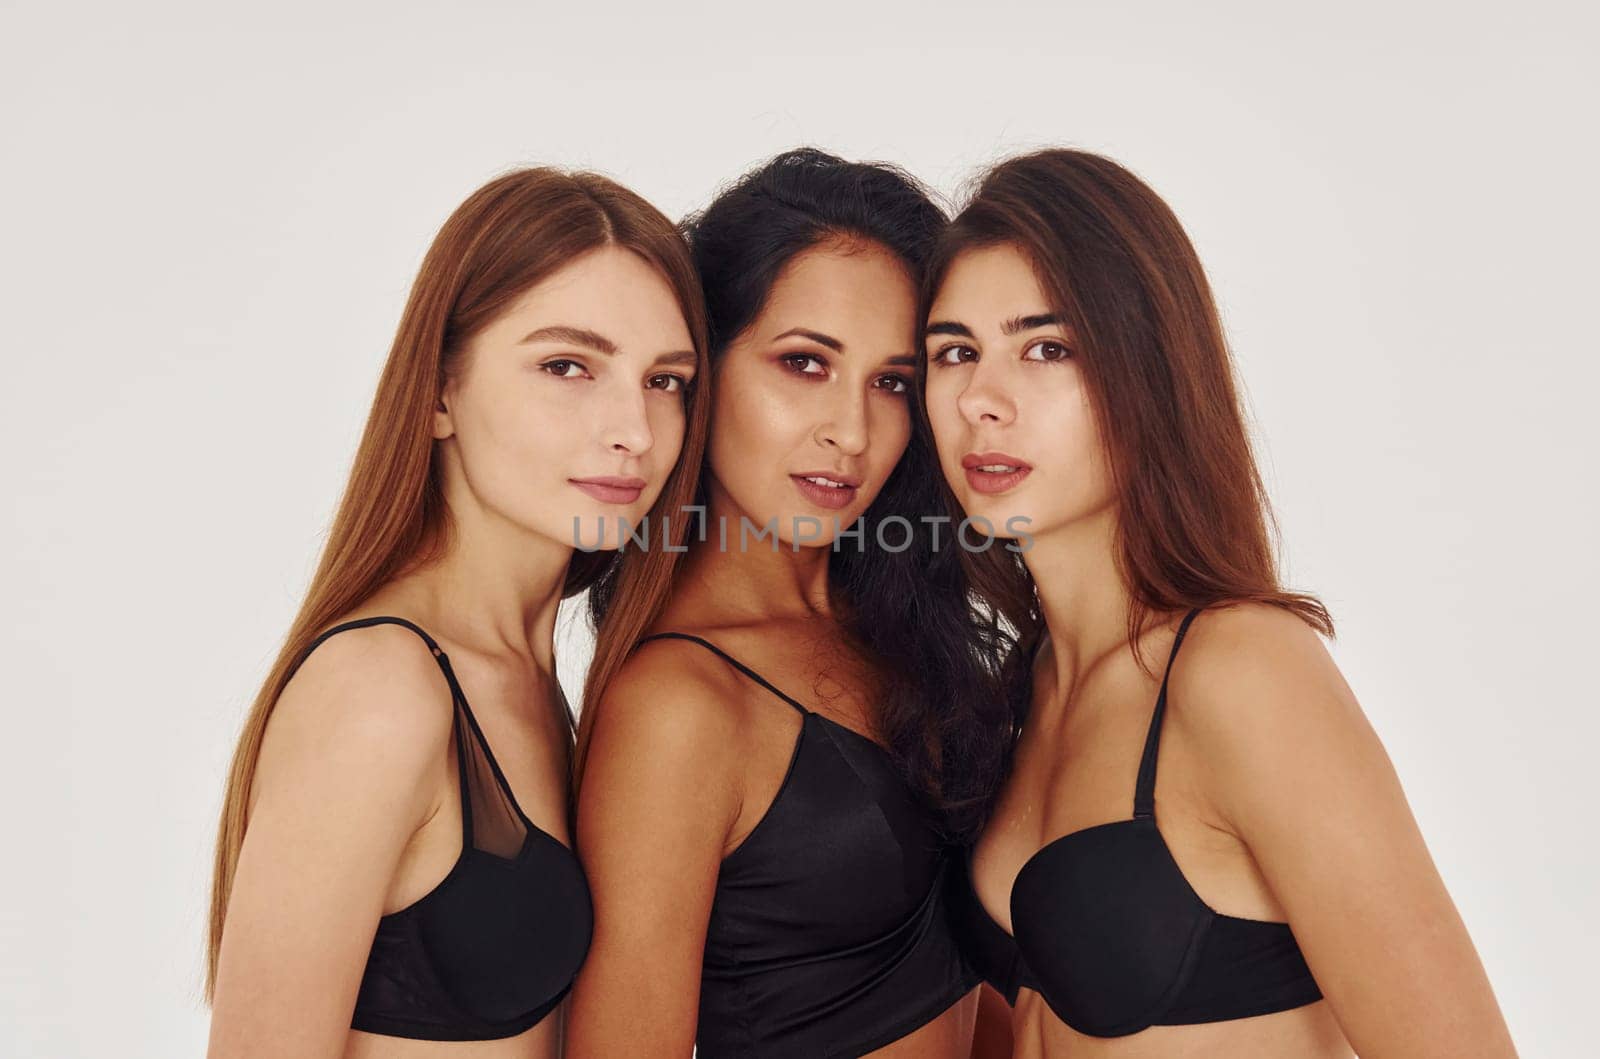 In black bra. Three young women in lingerie together indoors. White background by Standret